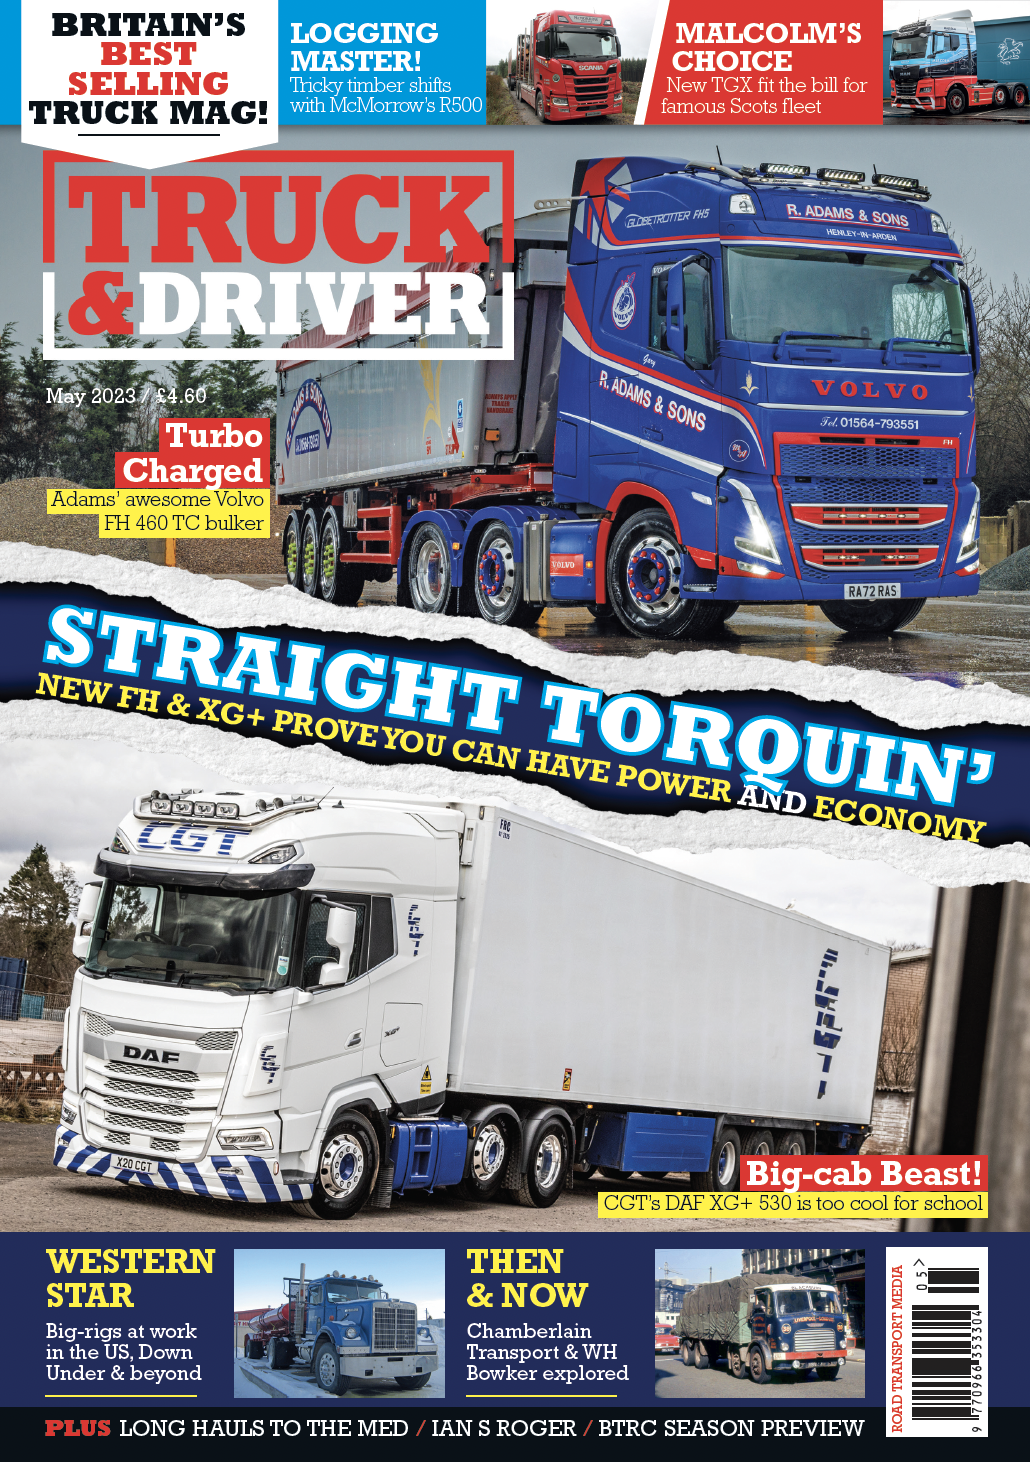 Truck & Driver cover May 2023